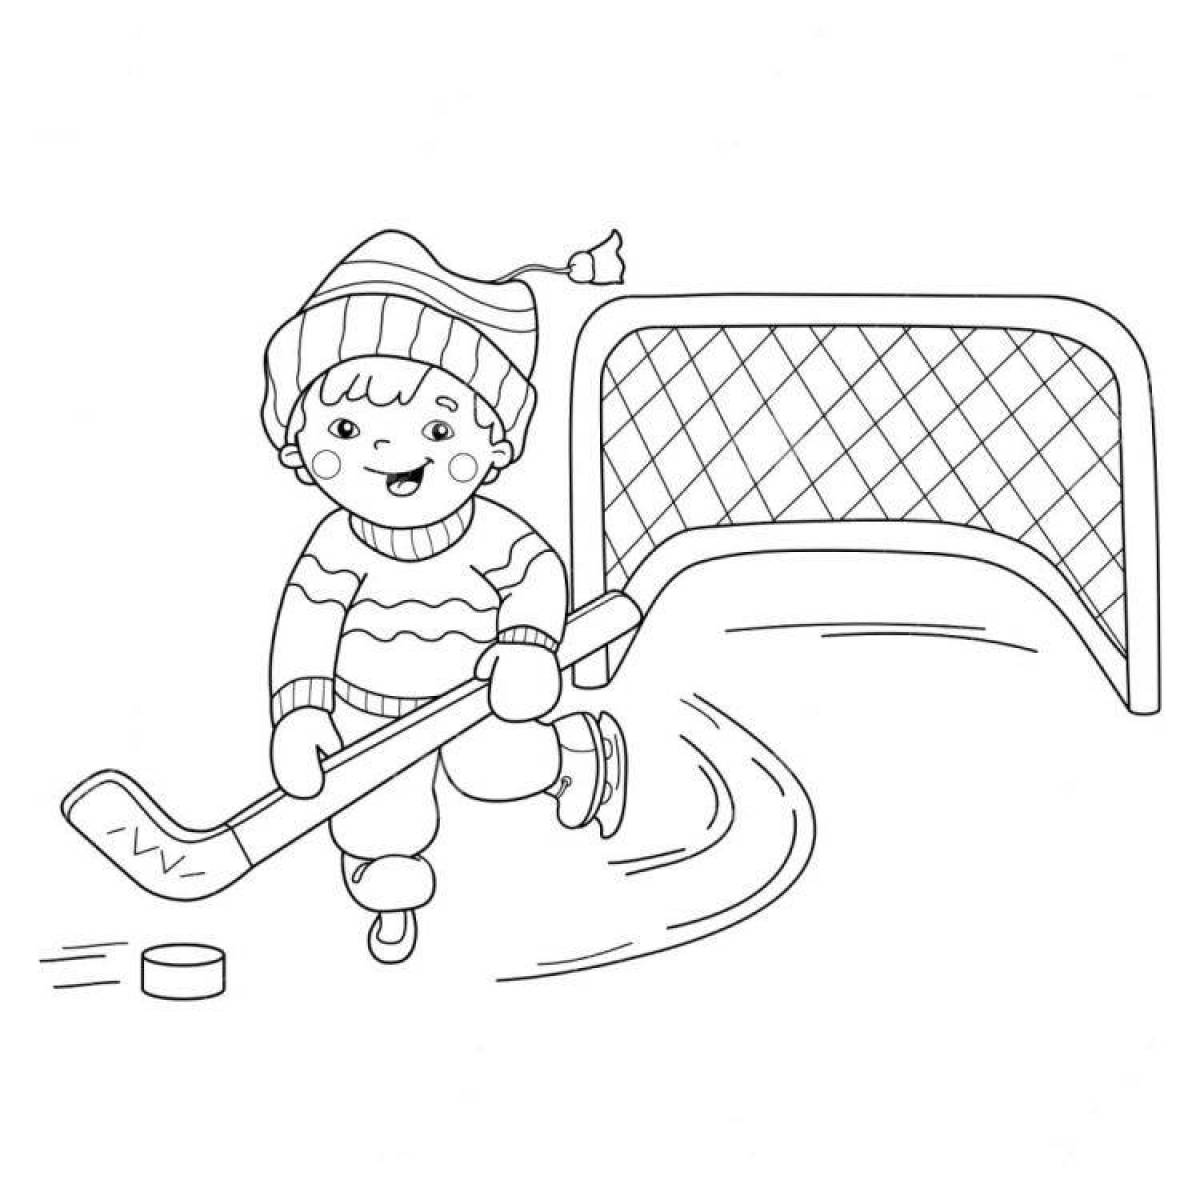 Playful coloring book winter sports for preschoolers